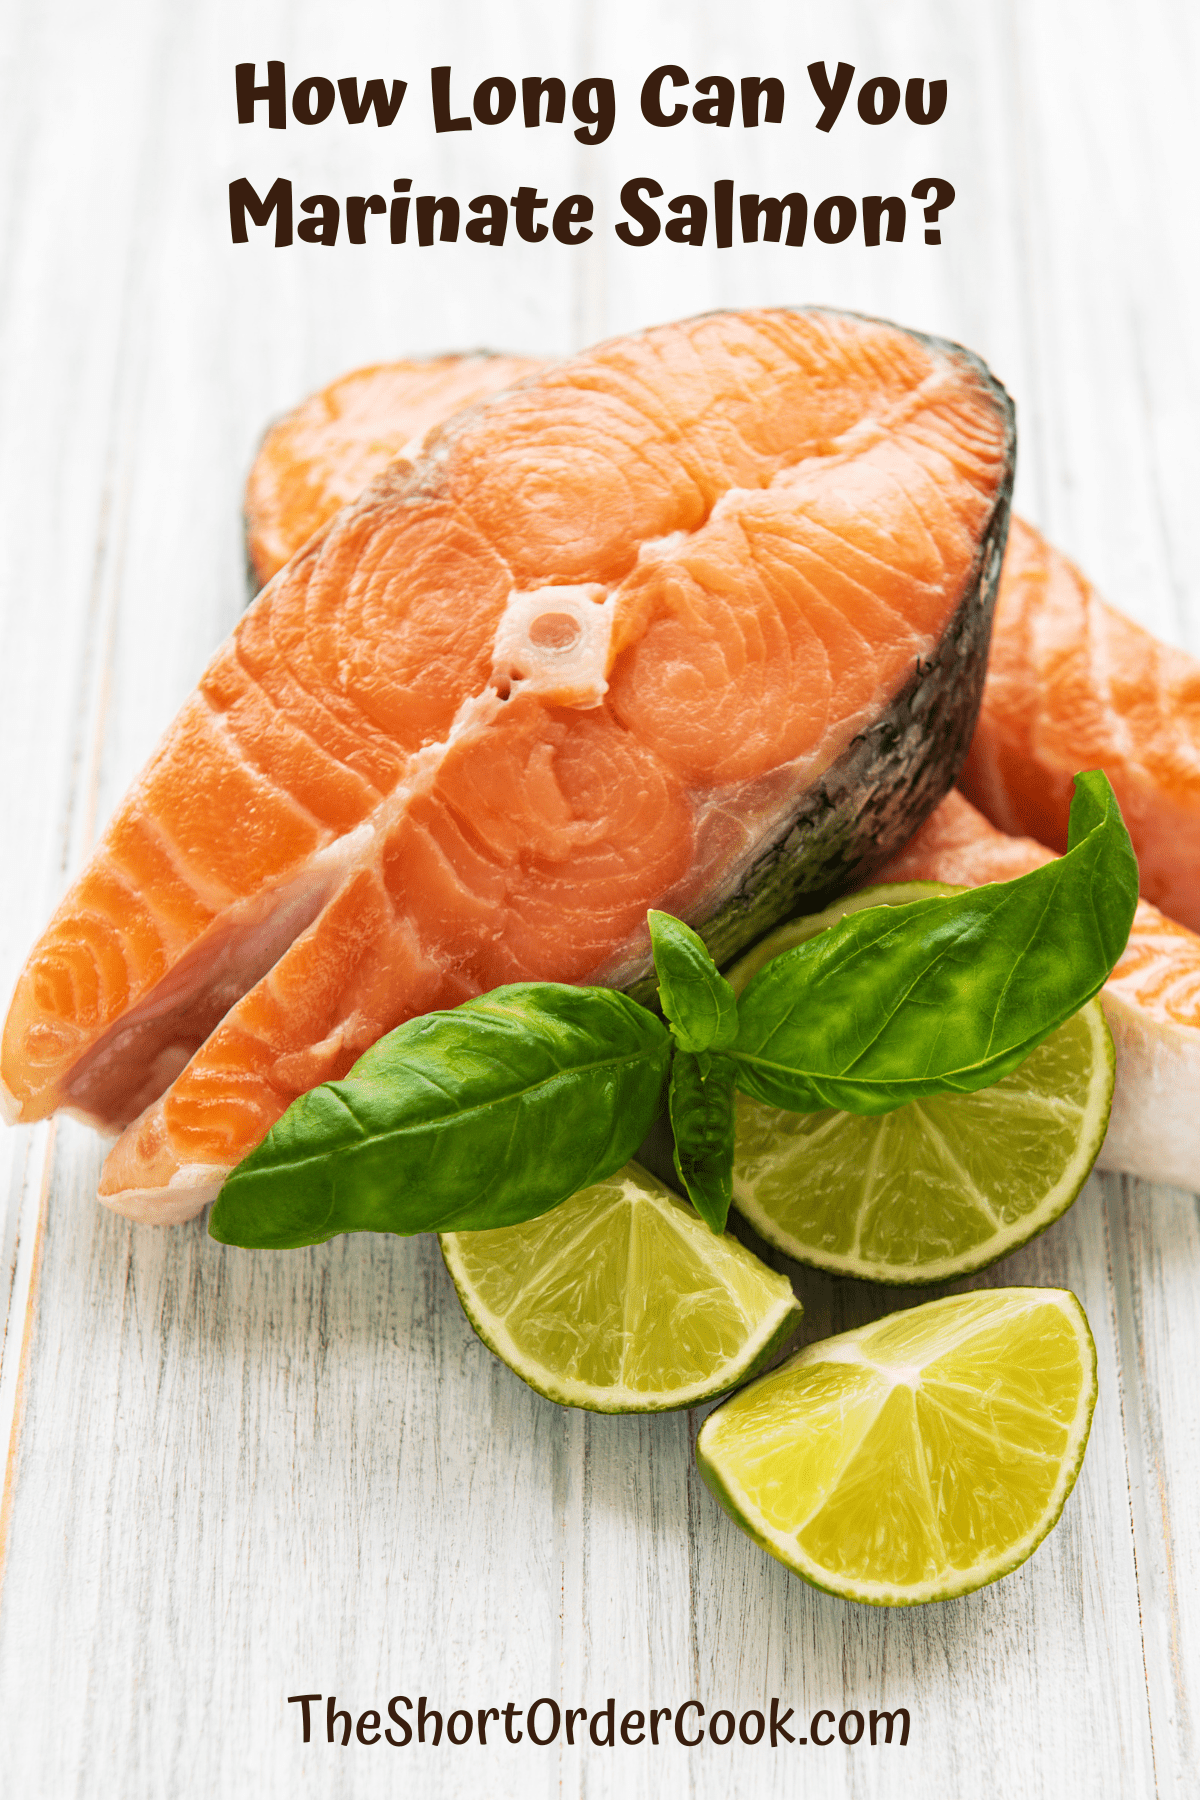 Salmon steaks on a cutting board with limes and herbs.